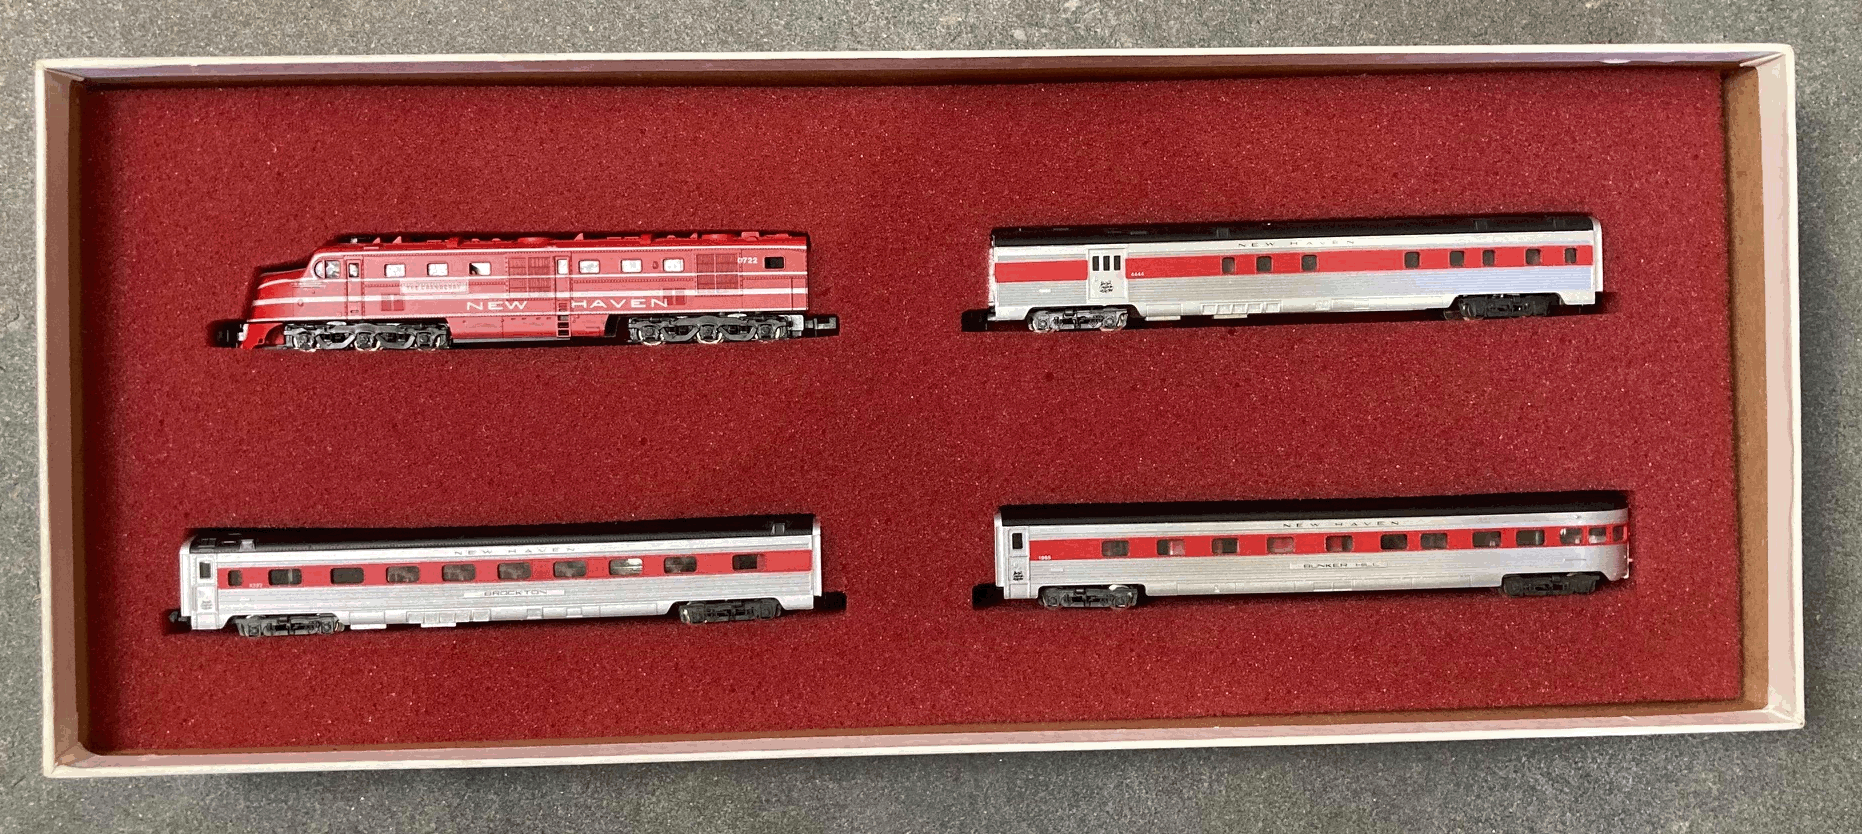 N Scale - Con-Cor - Limited Edition Set #15 / 8405 - Passenger Train, Diesel, North American, Transition Era - New Haven - 4-Unit